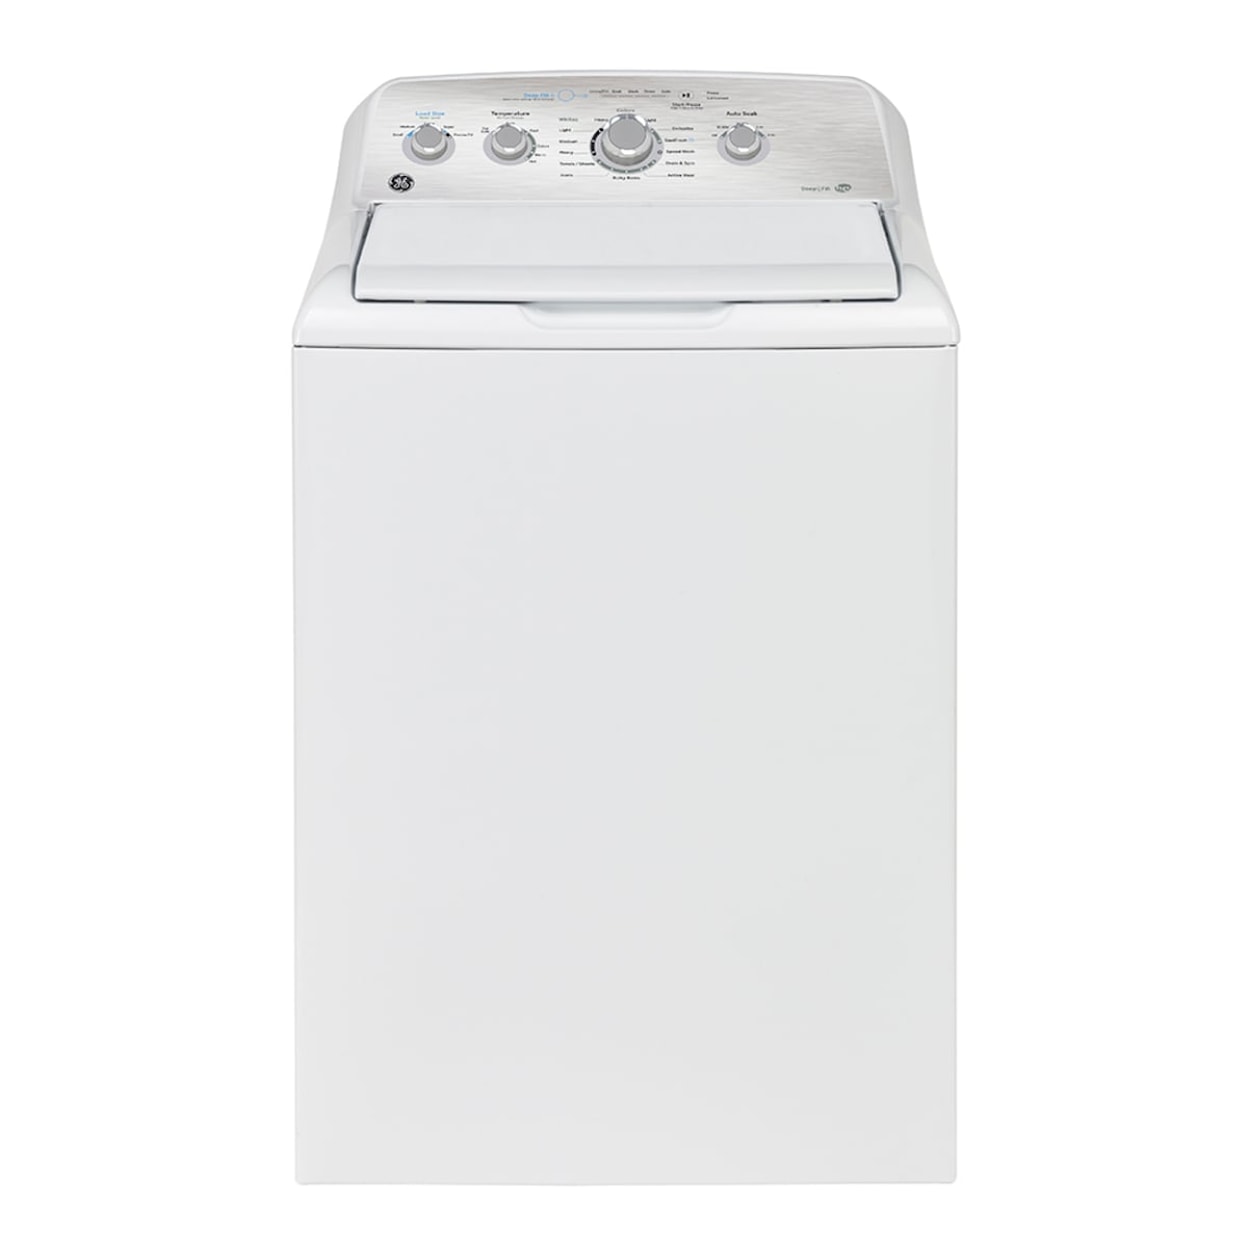 GE Appliances Washers Top Load Washer